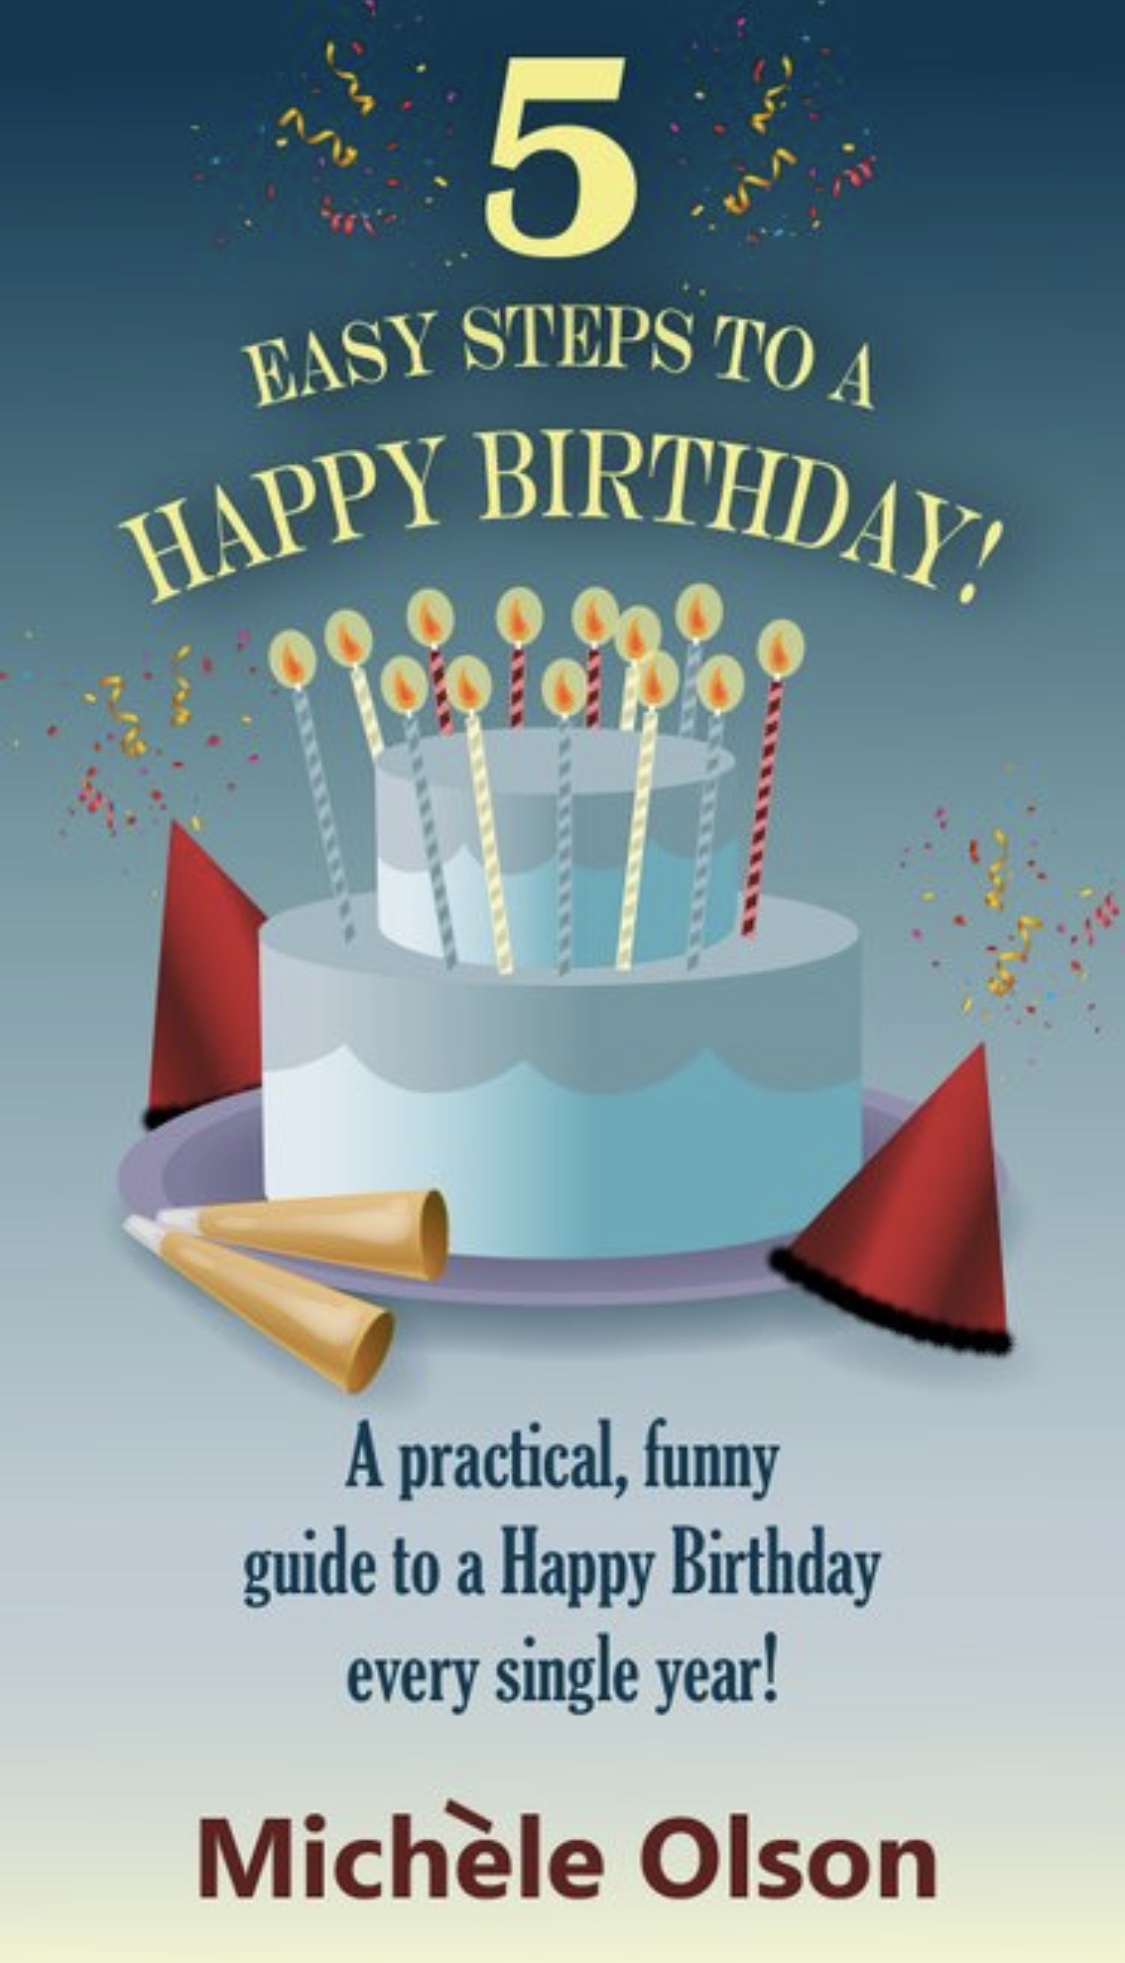 5 Easy Steps To A Happy Birthday! by Michele Olson · 